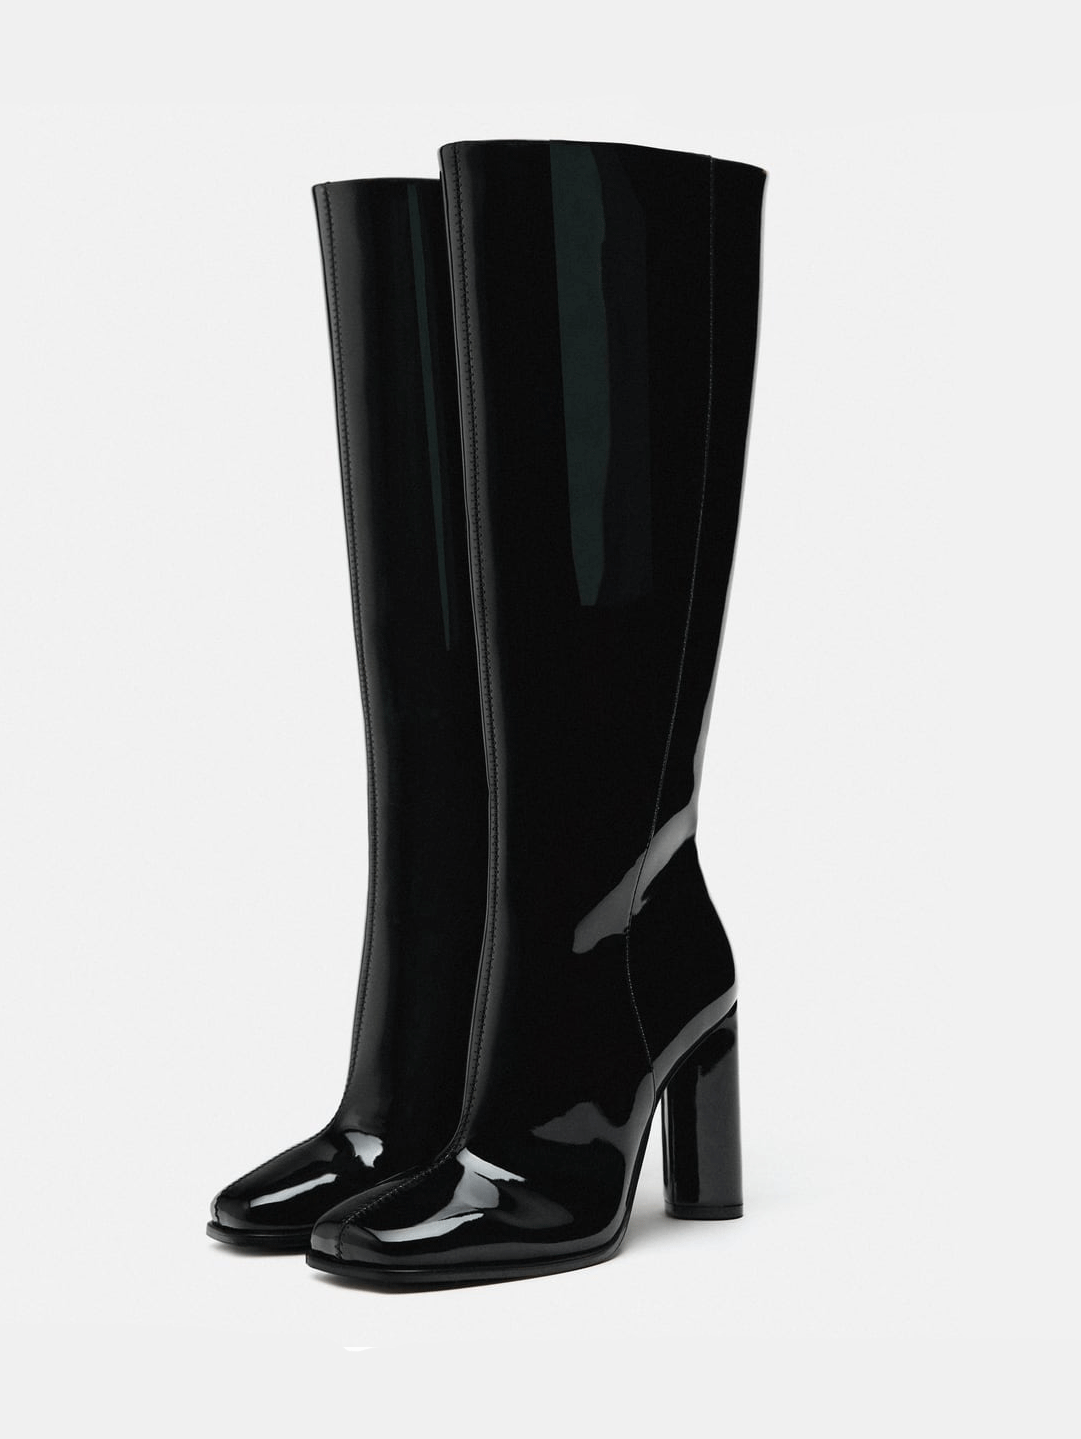 Zara + Faux Patent Leather Heeled Boots